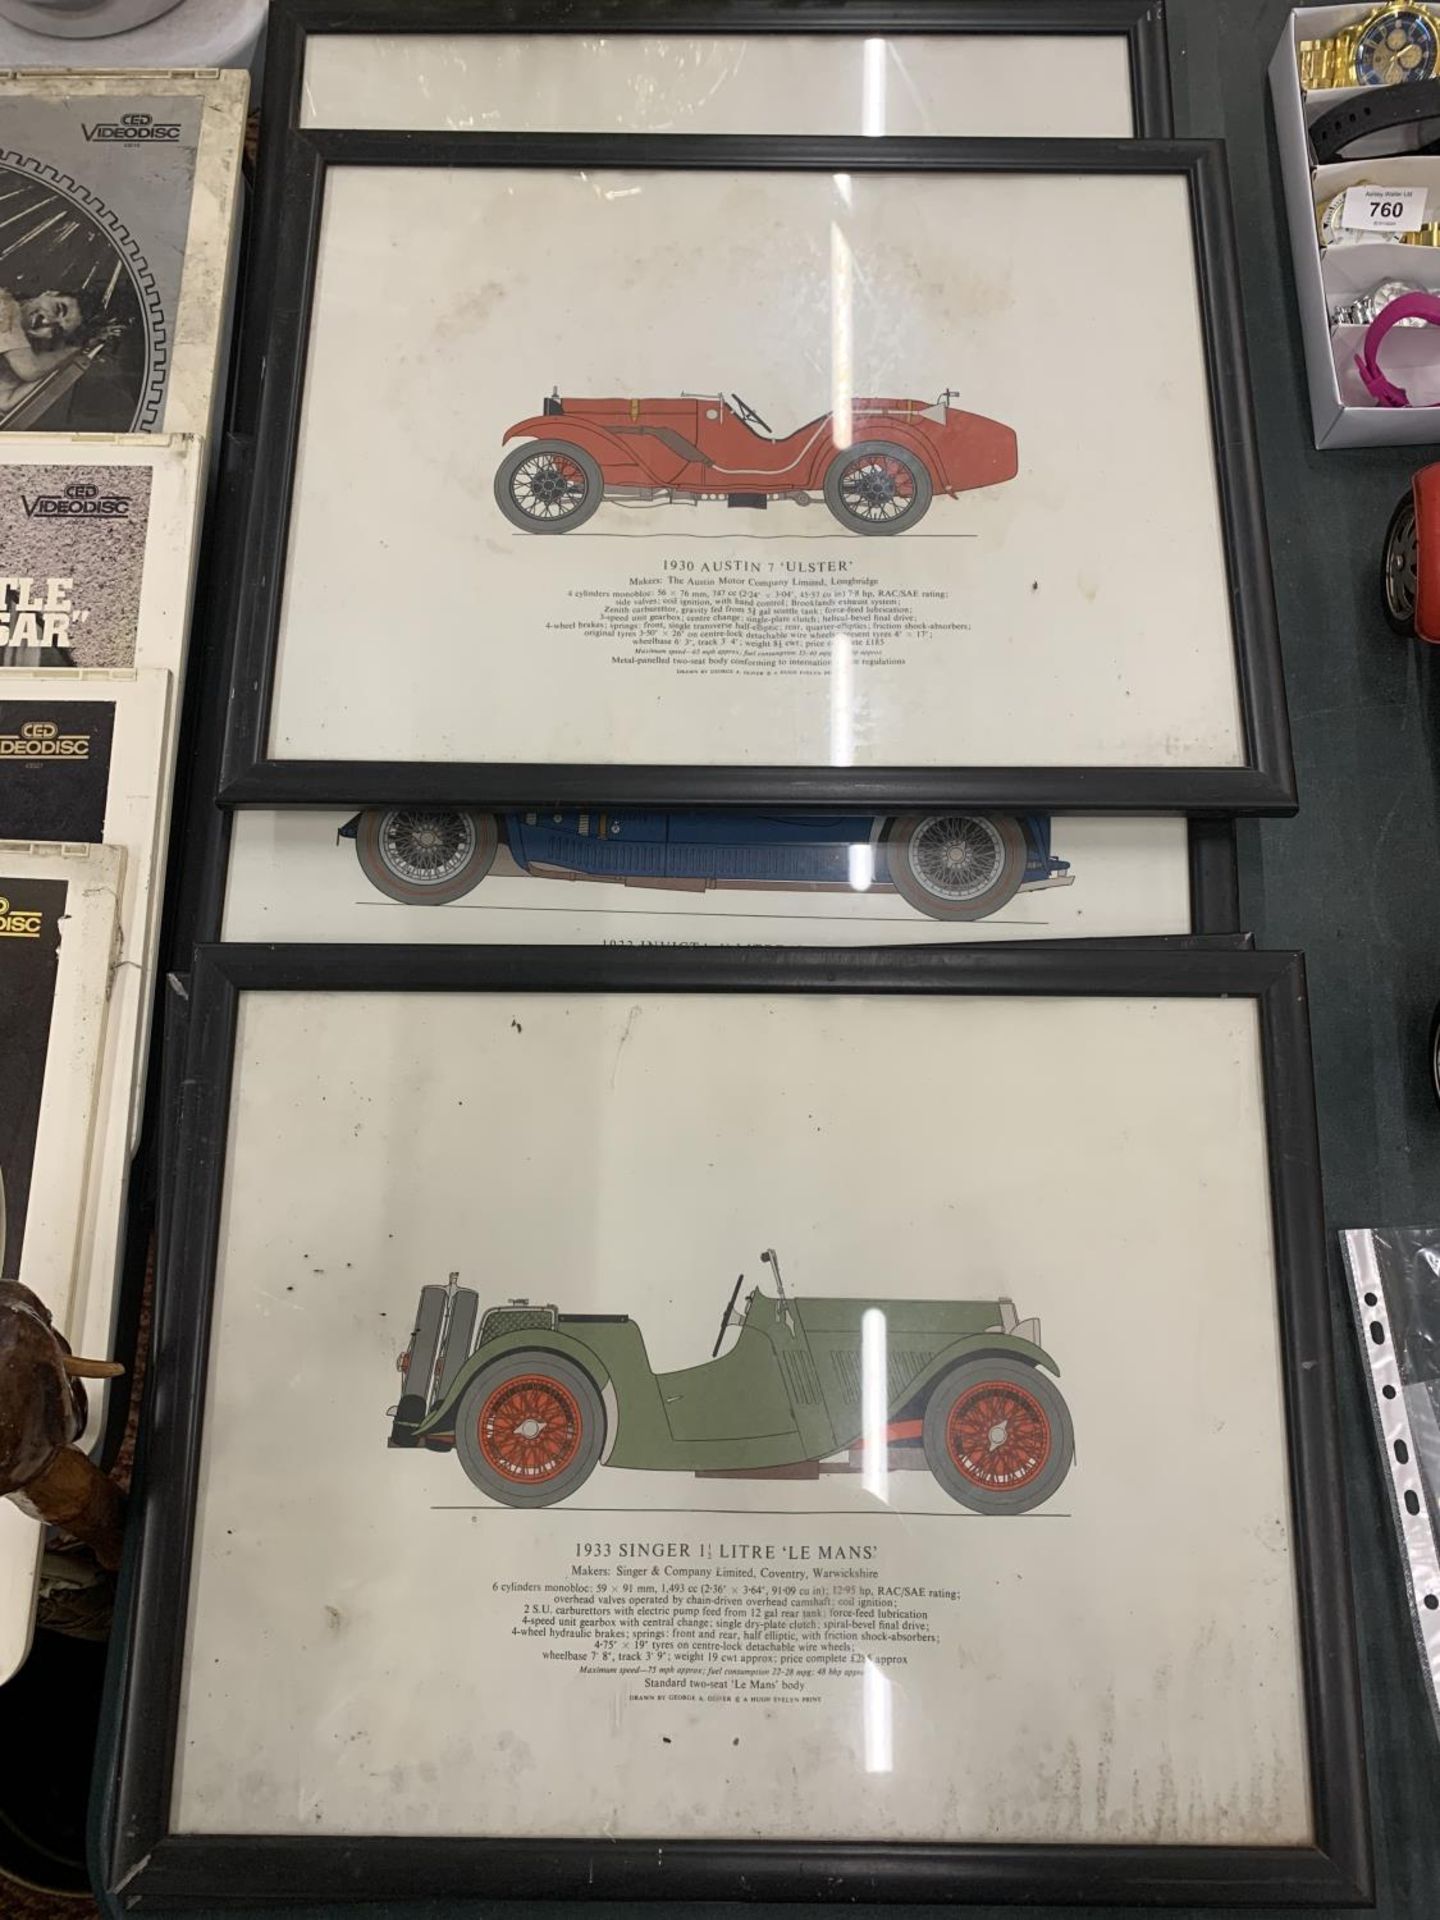 SIX FRAMED PRINTS OF VINTAGE CARS TO INCLUDE A 1930 AUSTIN 7 'ULSTER', 1926 SUNBEAM 3 LITRE, ETC